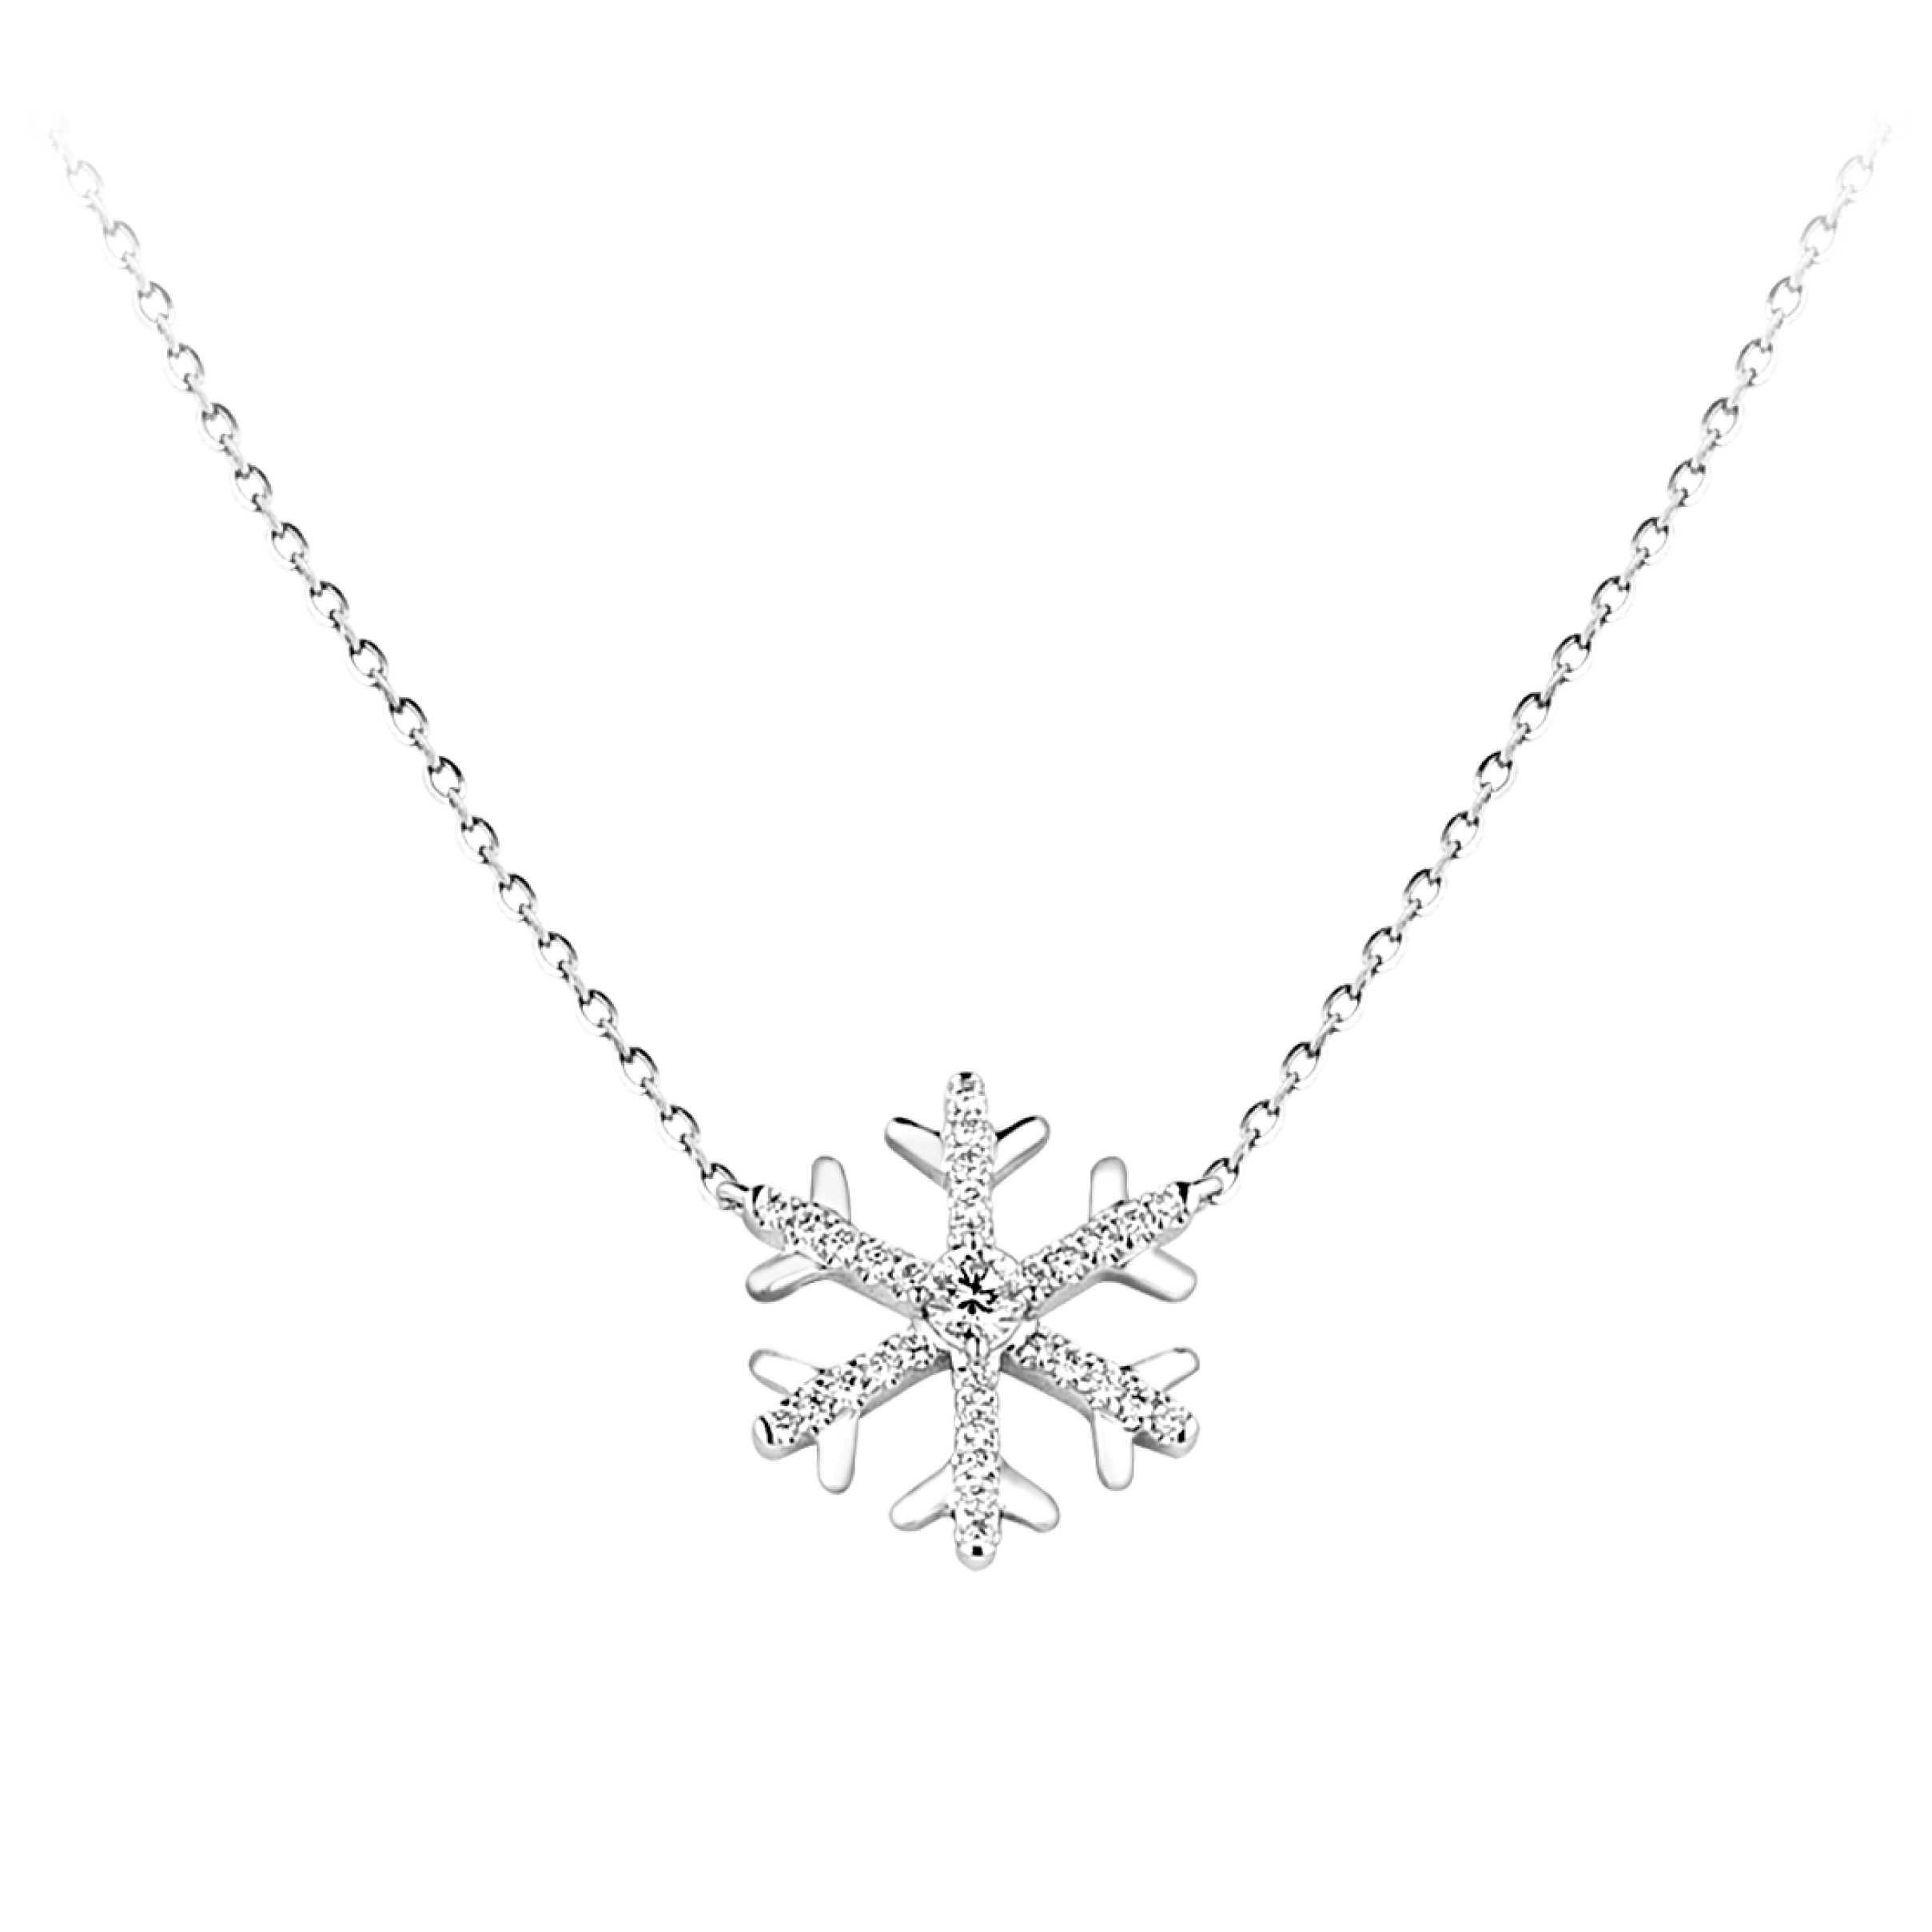 Dear Q“Love of Snowy” Necklace